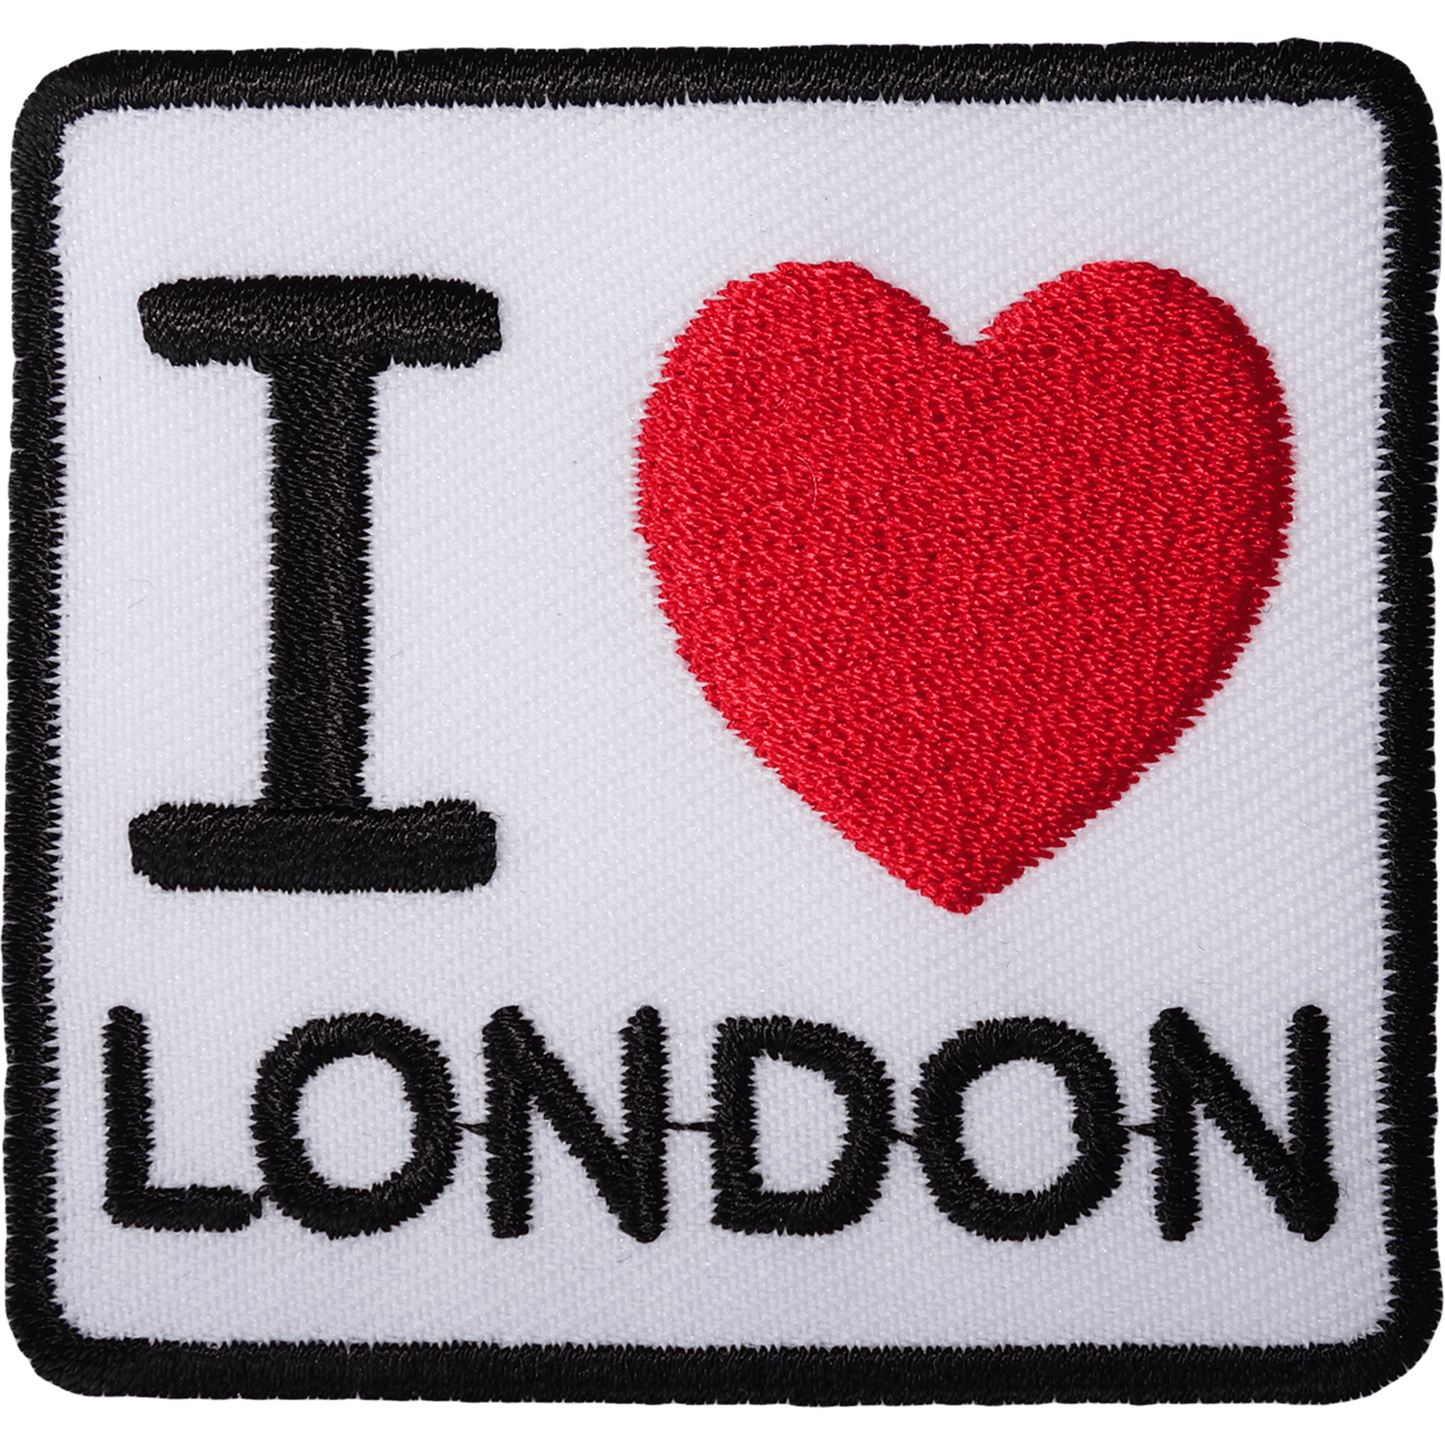 I Love London Patch Iron Sew On Red Heart UK British England Embroidered Badge